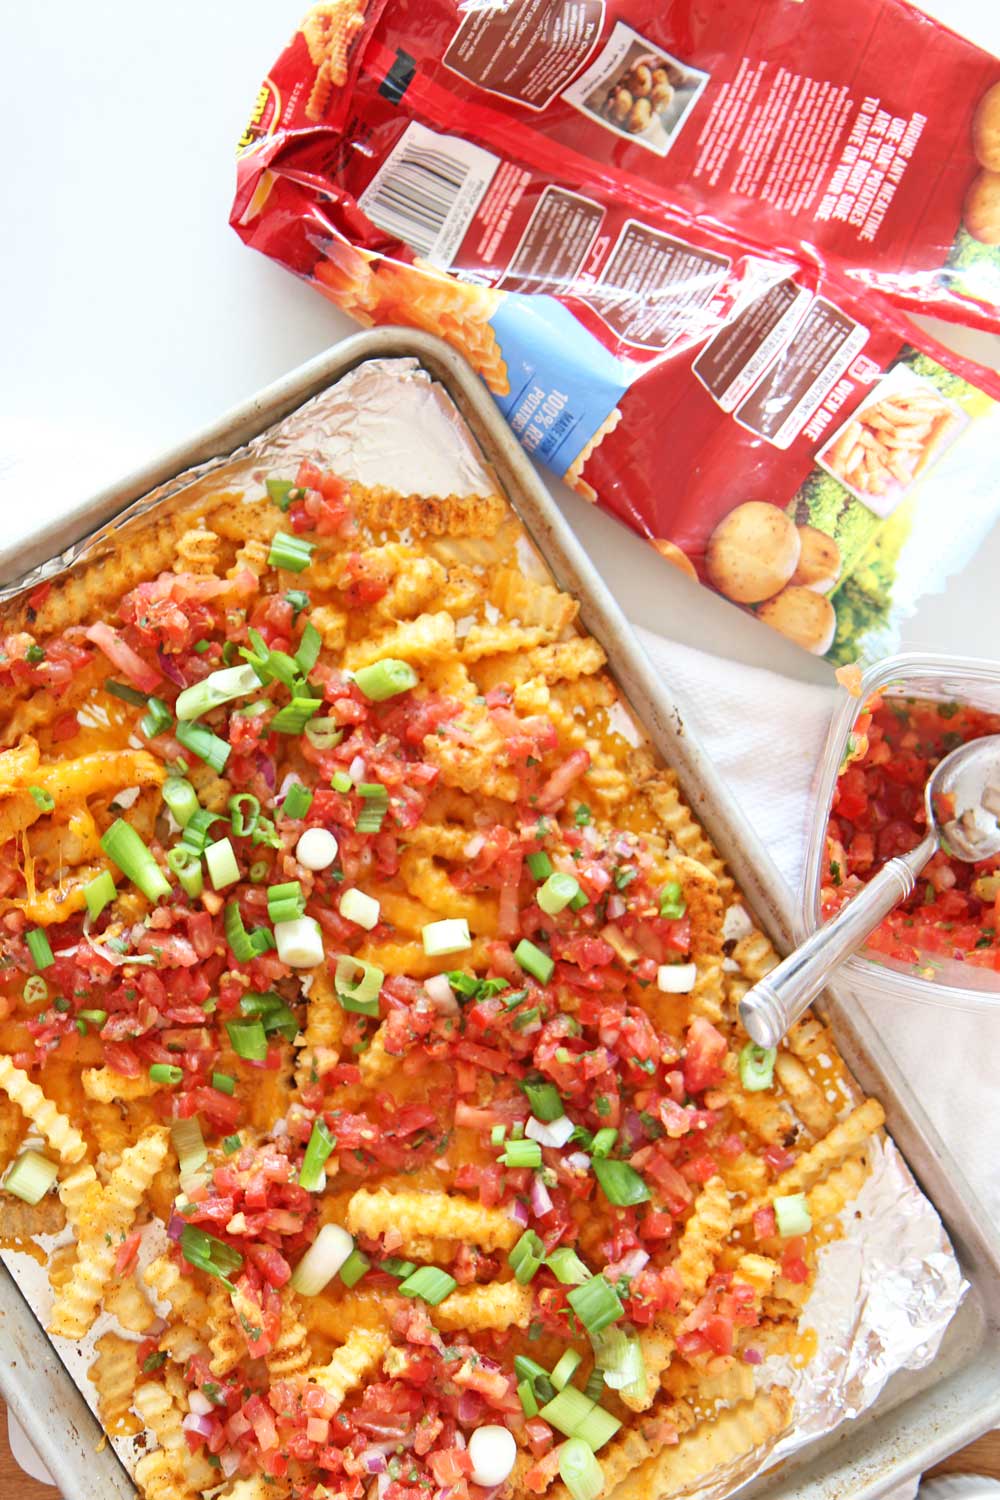 How to Transform Frozen Fries Into Loaded Taco Fries Recipe. Frozen fries, salsa, scallions, cheese, and chili seasoning. Transforming frozen fries is as easy as pantry seasonings cheese, and an oven. Happy sheet pan cooking! www.ChopHappy.com #frozenfries #nachos #pantry 